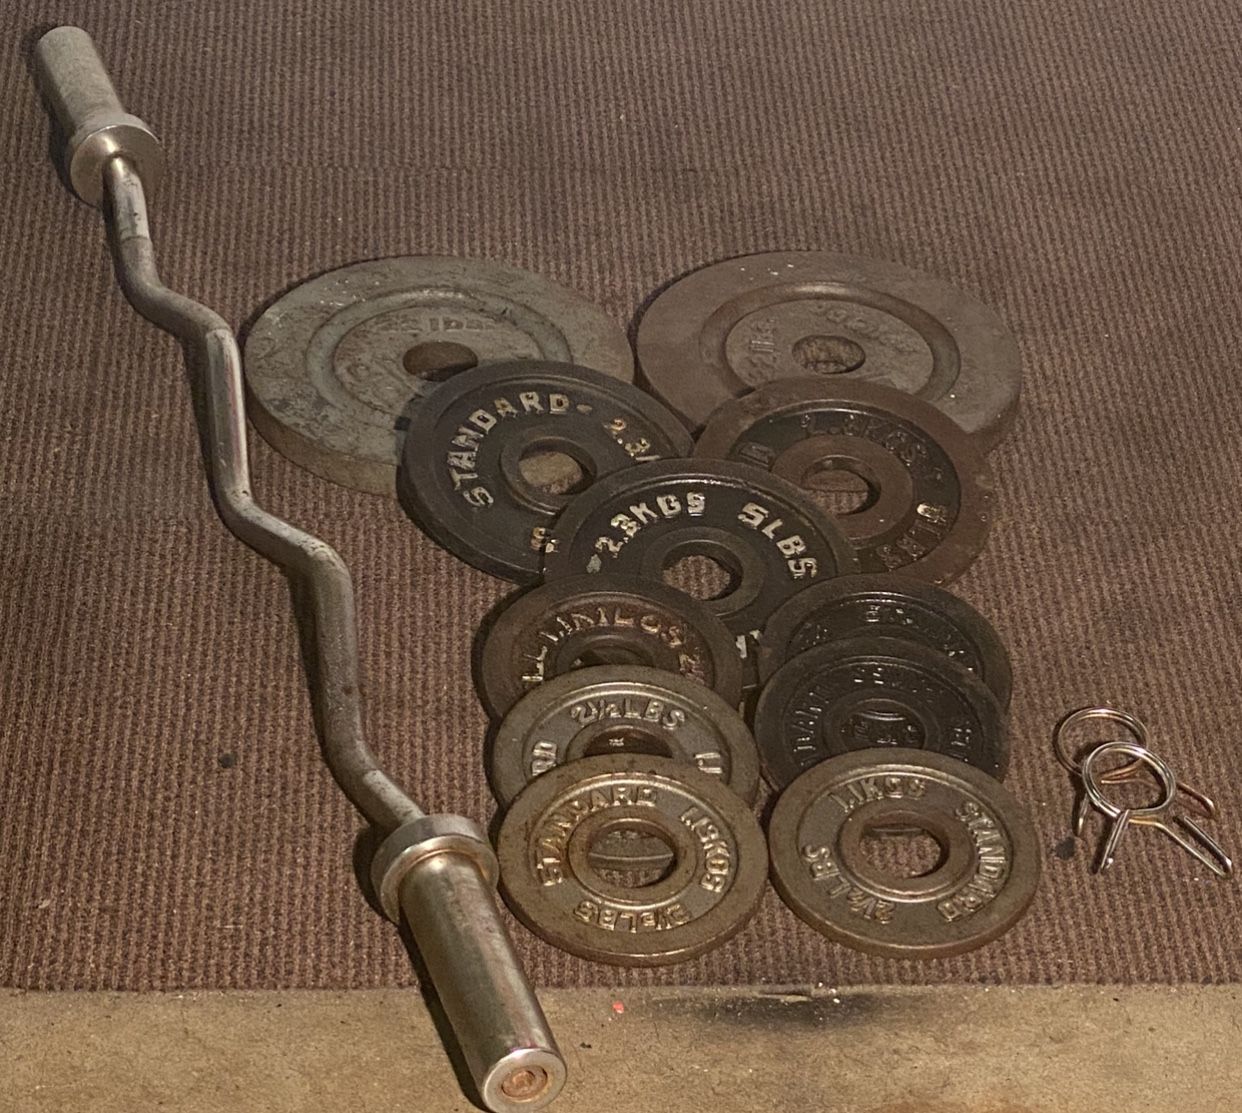 74 pounds of Olympic weights and curl bar with clips